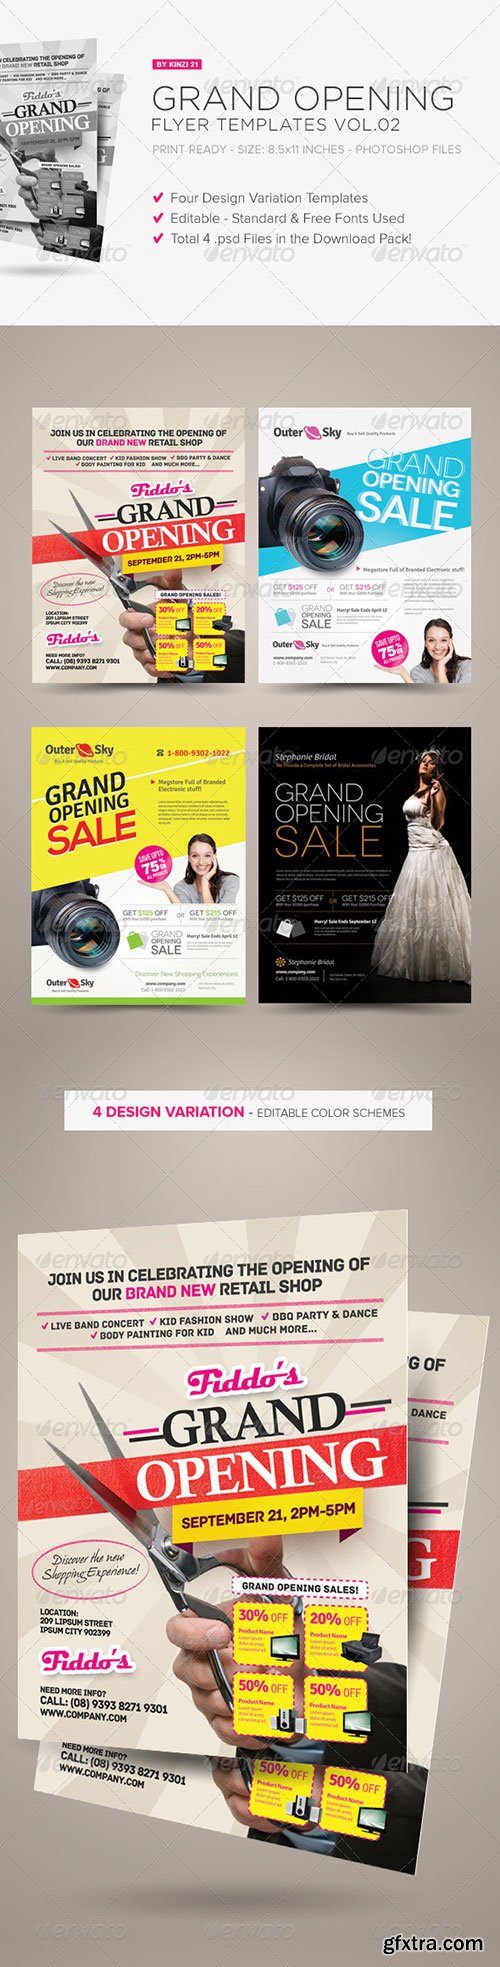 GraphicRiver - Grand Opening Flyers Vol.02